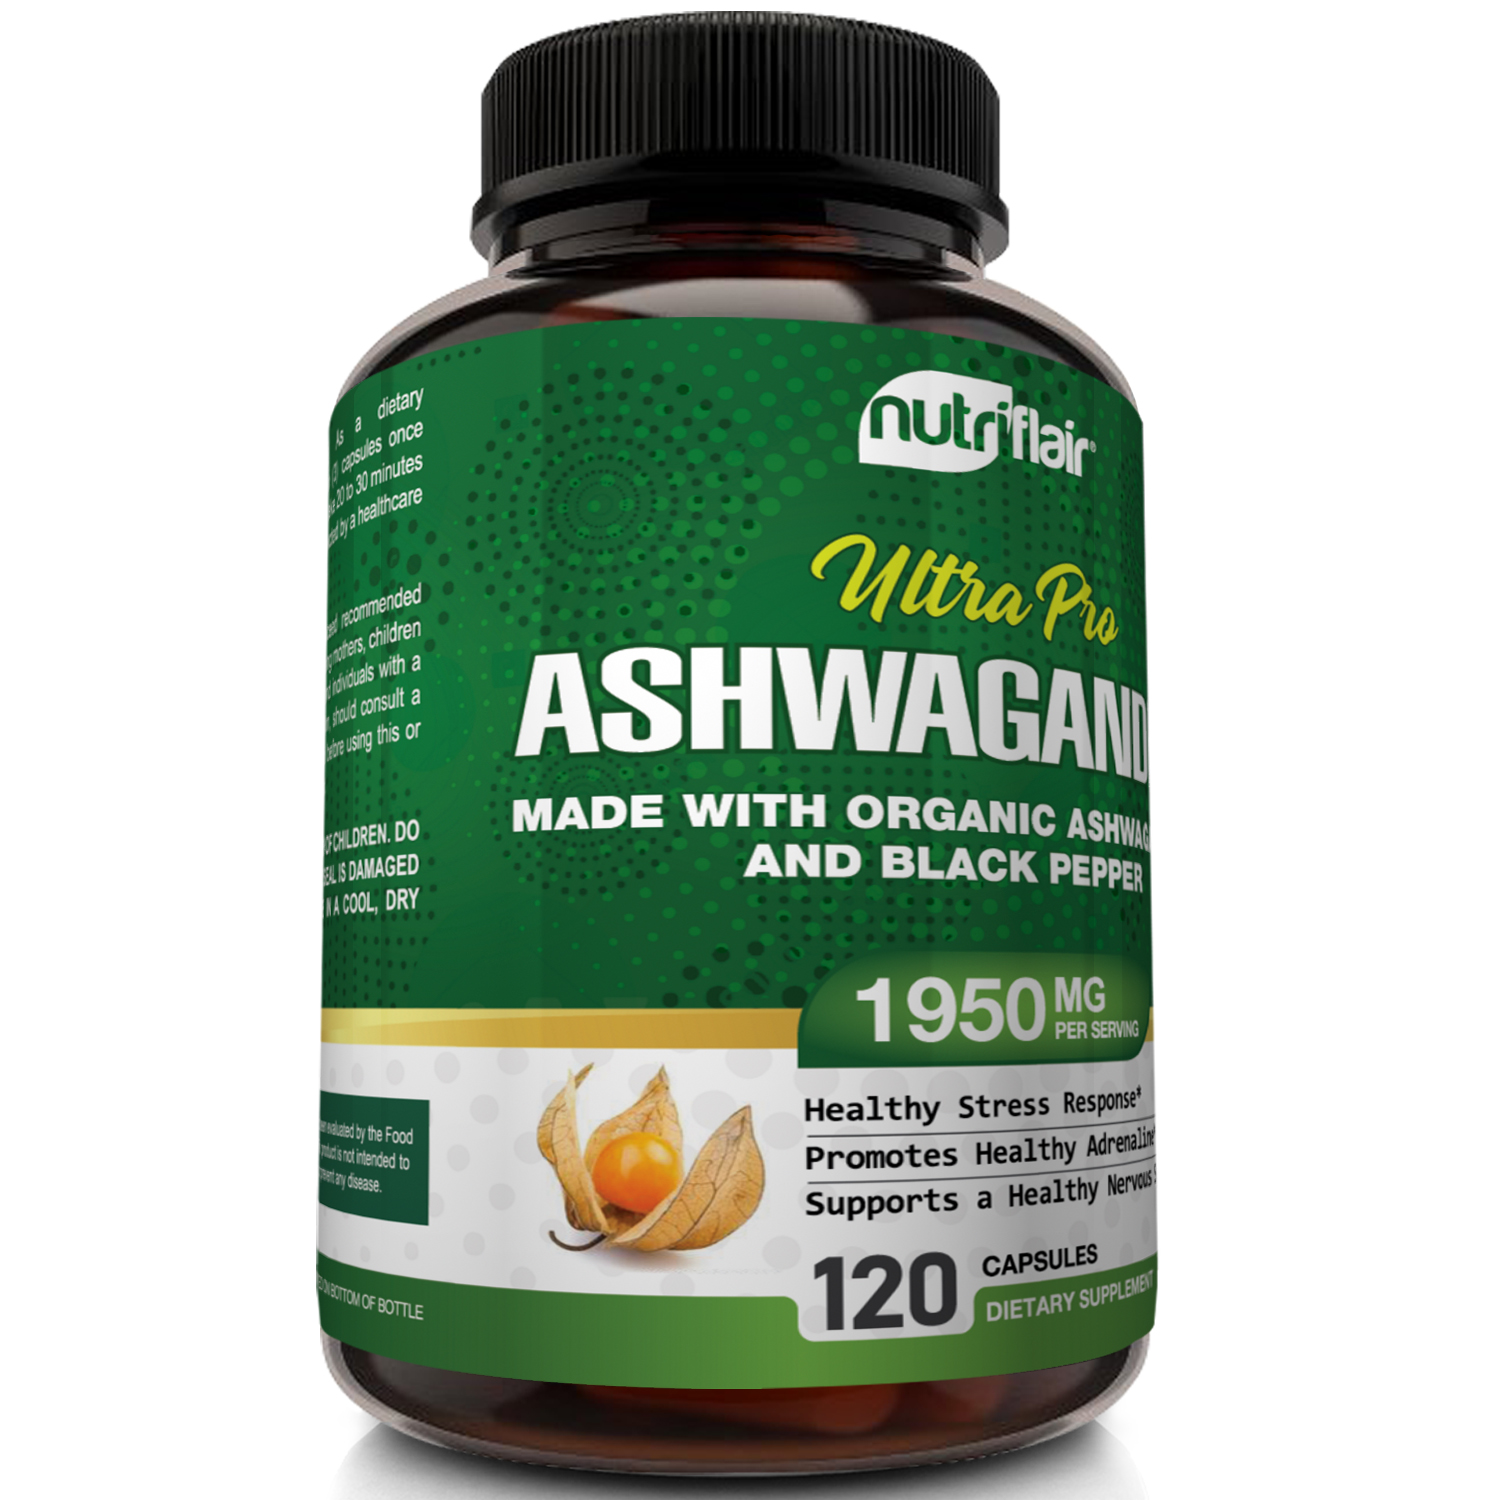 NutriFlair Certified Organic Ashwagandha Capsules for Natural Anxiety and Stress Relief Dietary Supplements 120 Capsules - image 5 of 7